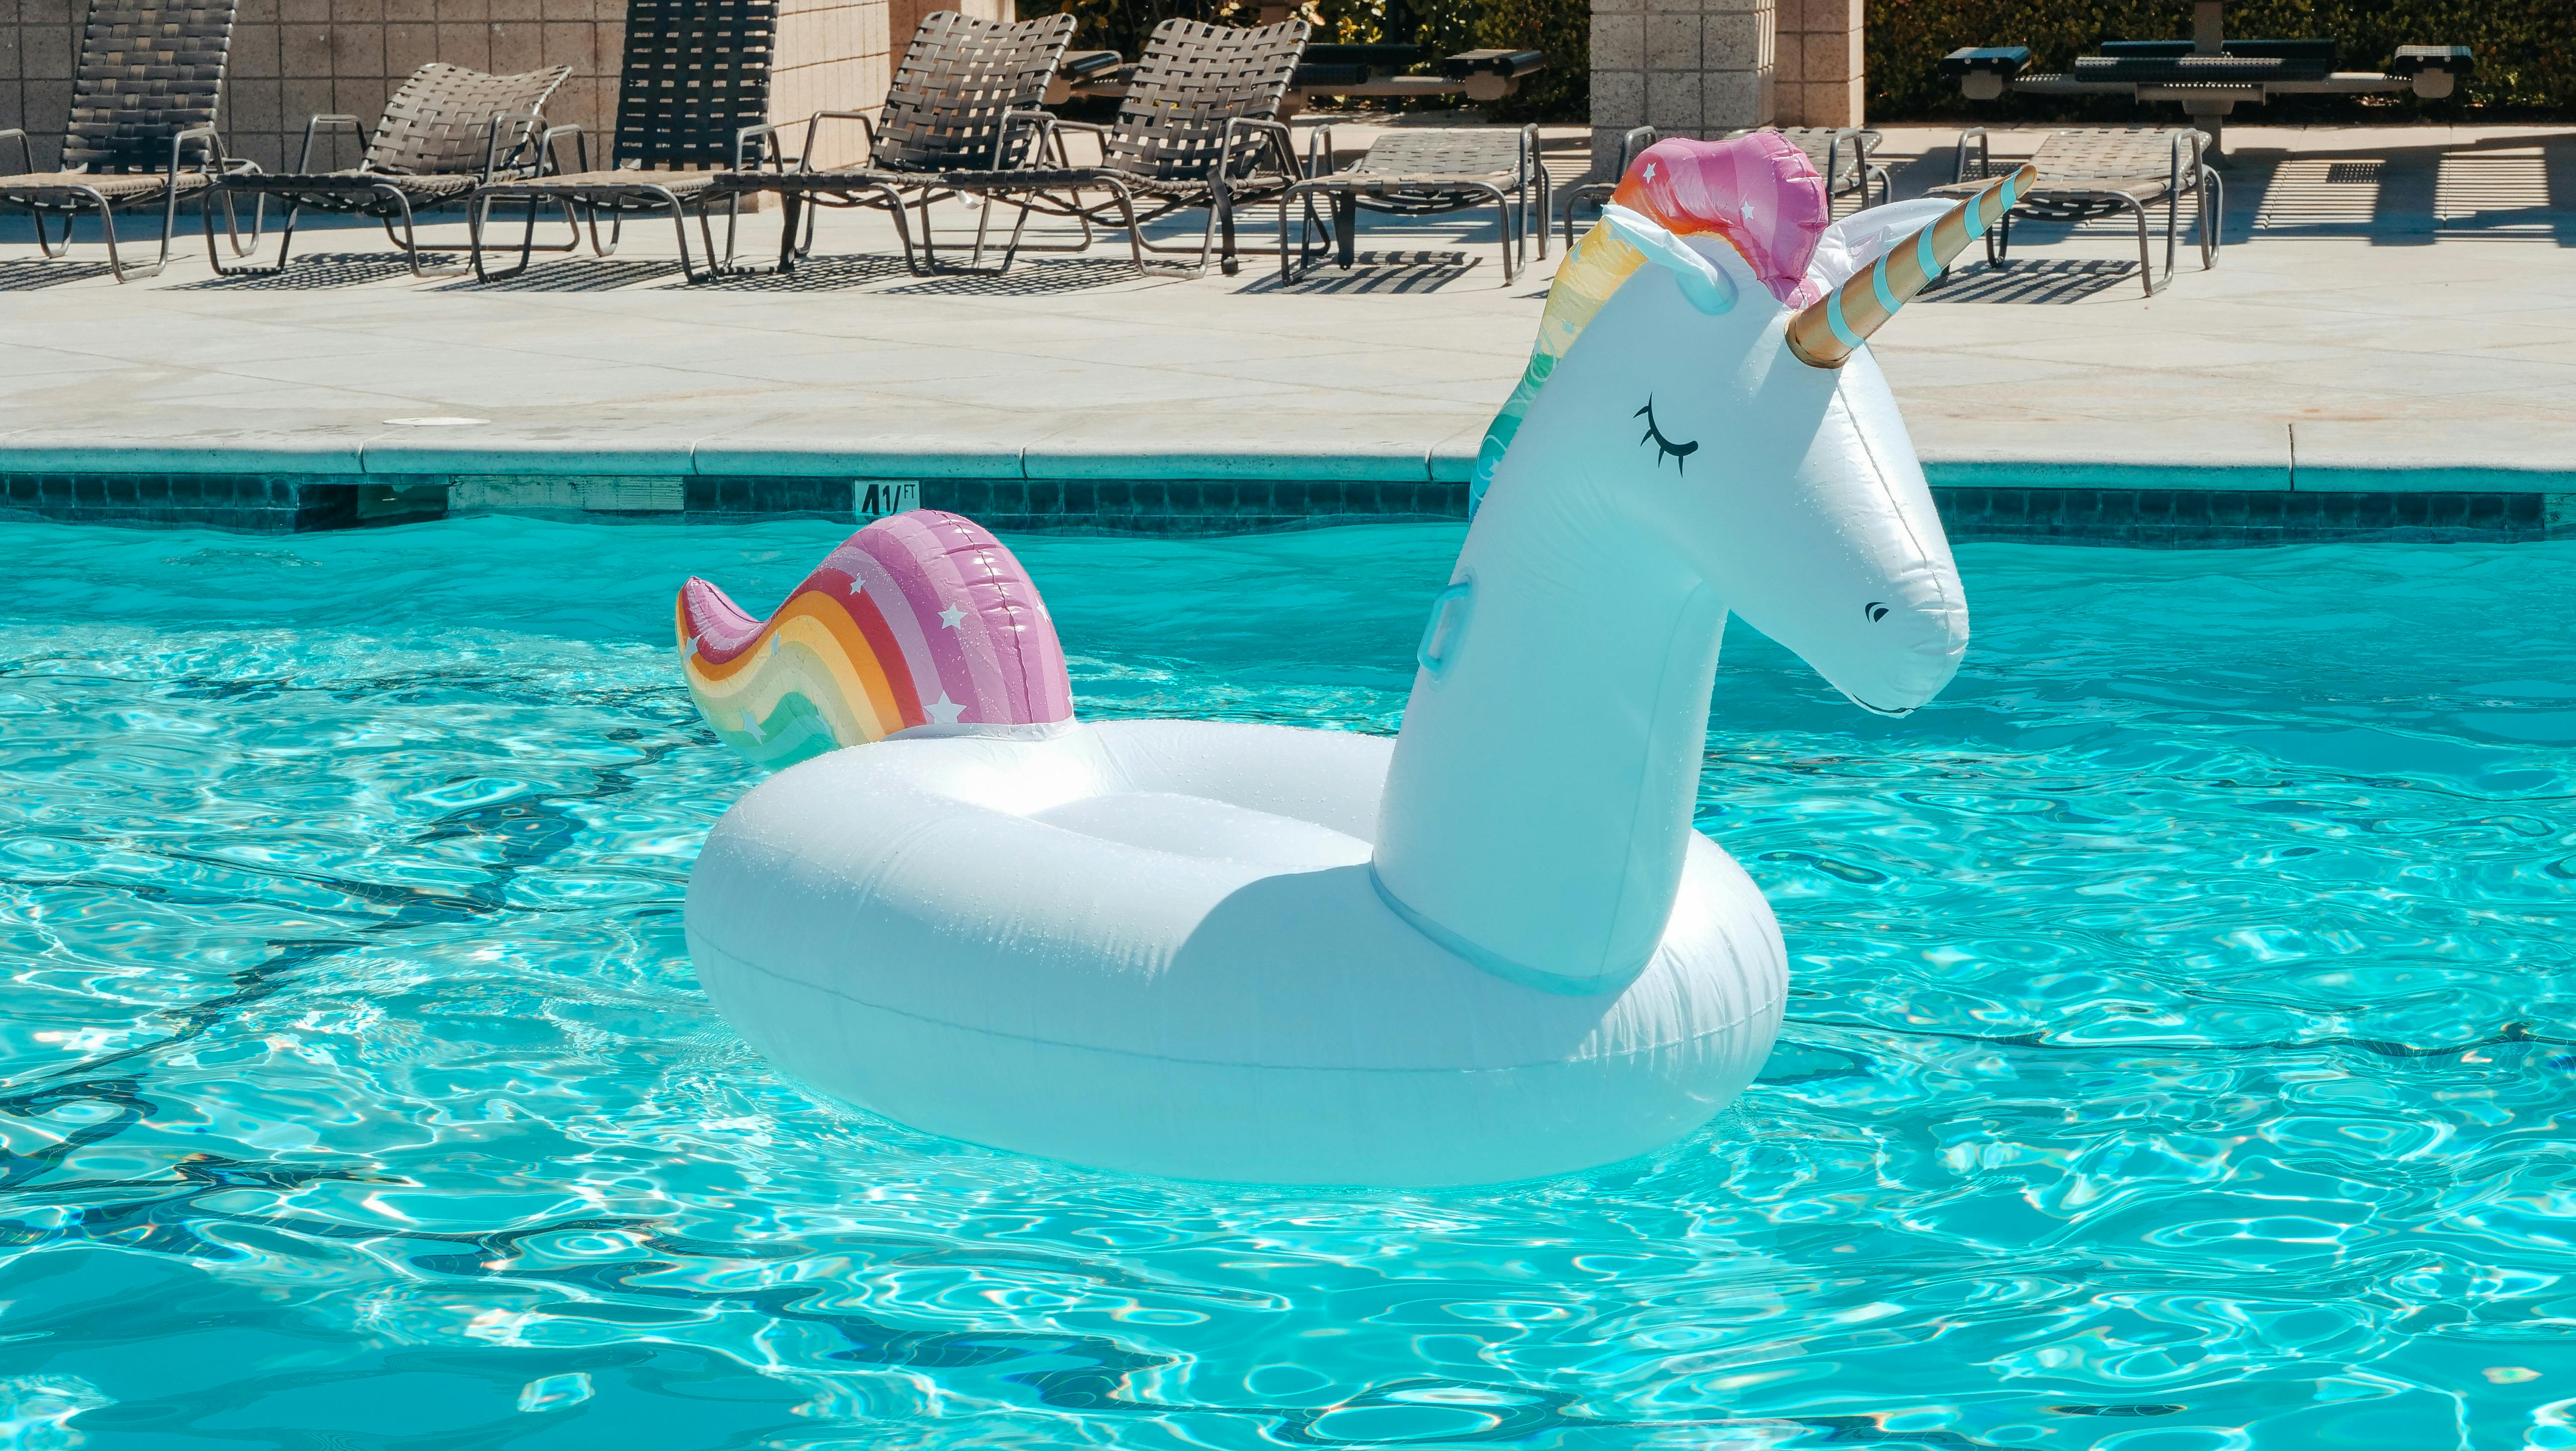 Pool Float Photos Perfect Flyers Great Stock Photo 1539297611  Shutterstock